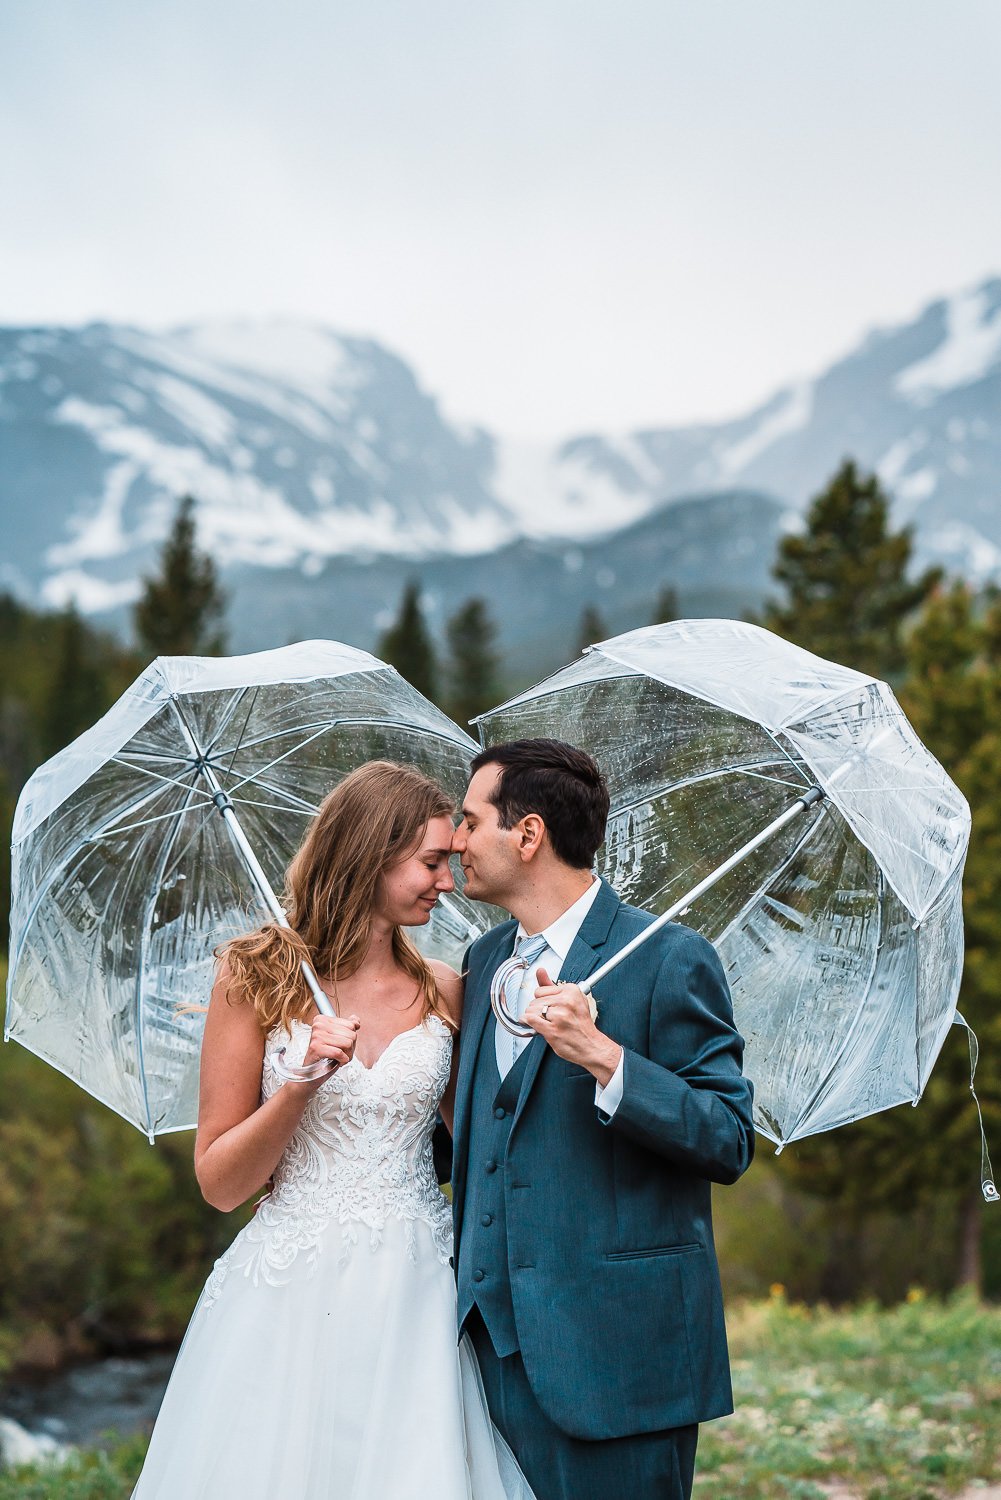 Elopement photos of a bride and groom sharing a romantic kiss under umbrellas in front of a majestic mountain.